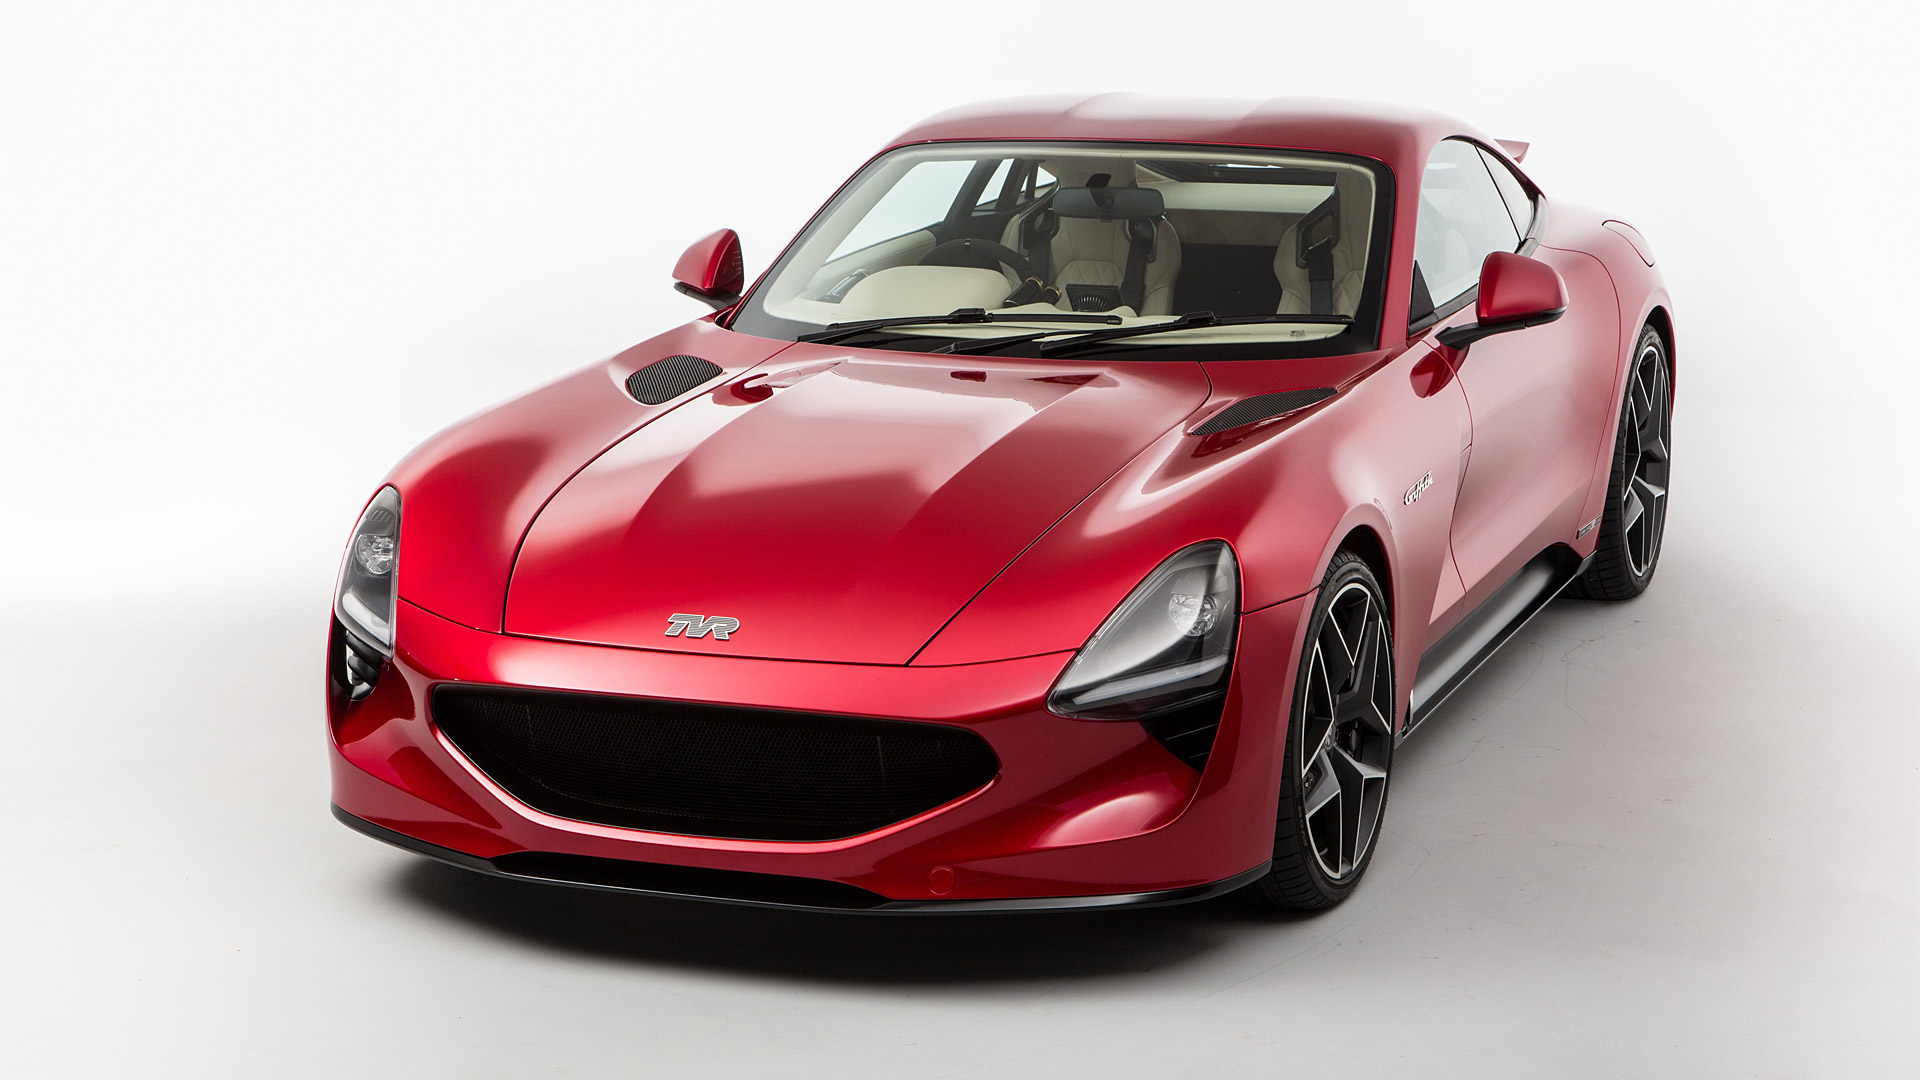 Tvr Griffith Wallpaper HD Image Wsupercars